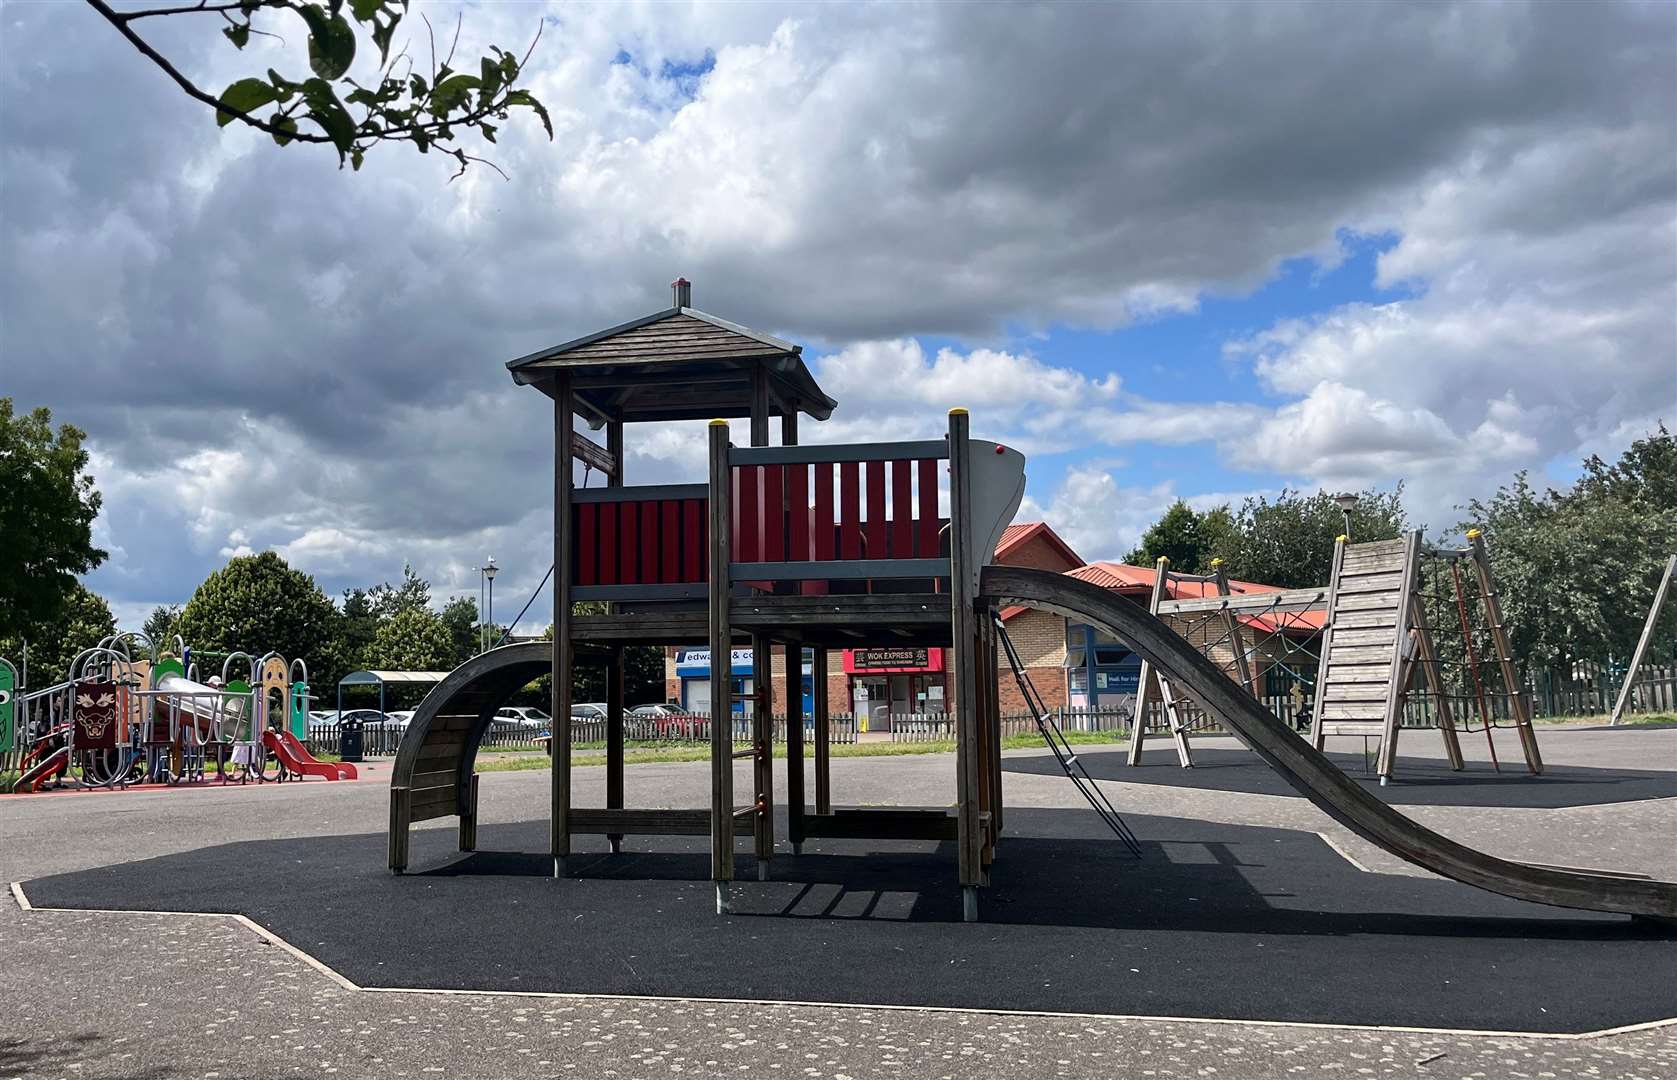 This piece of equipment in Goat Lees park in Kennington has been used as a “watchtower” according to the ward councillor